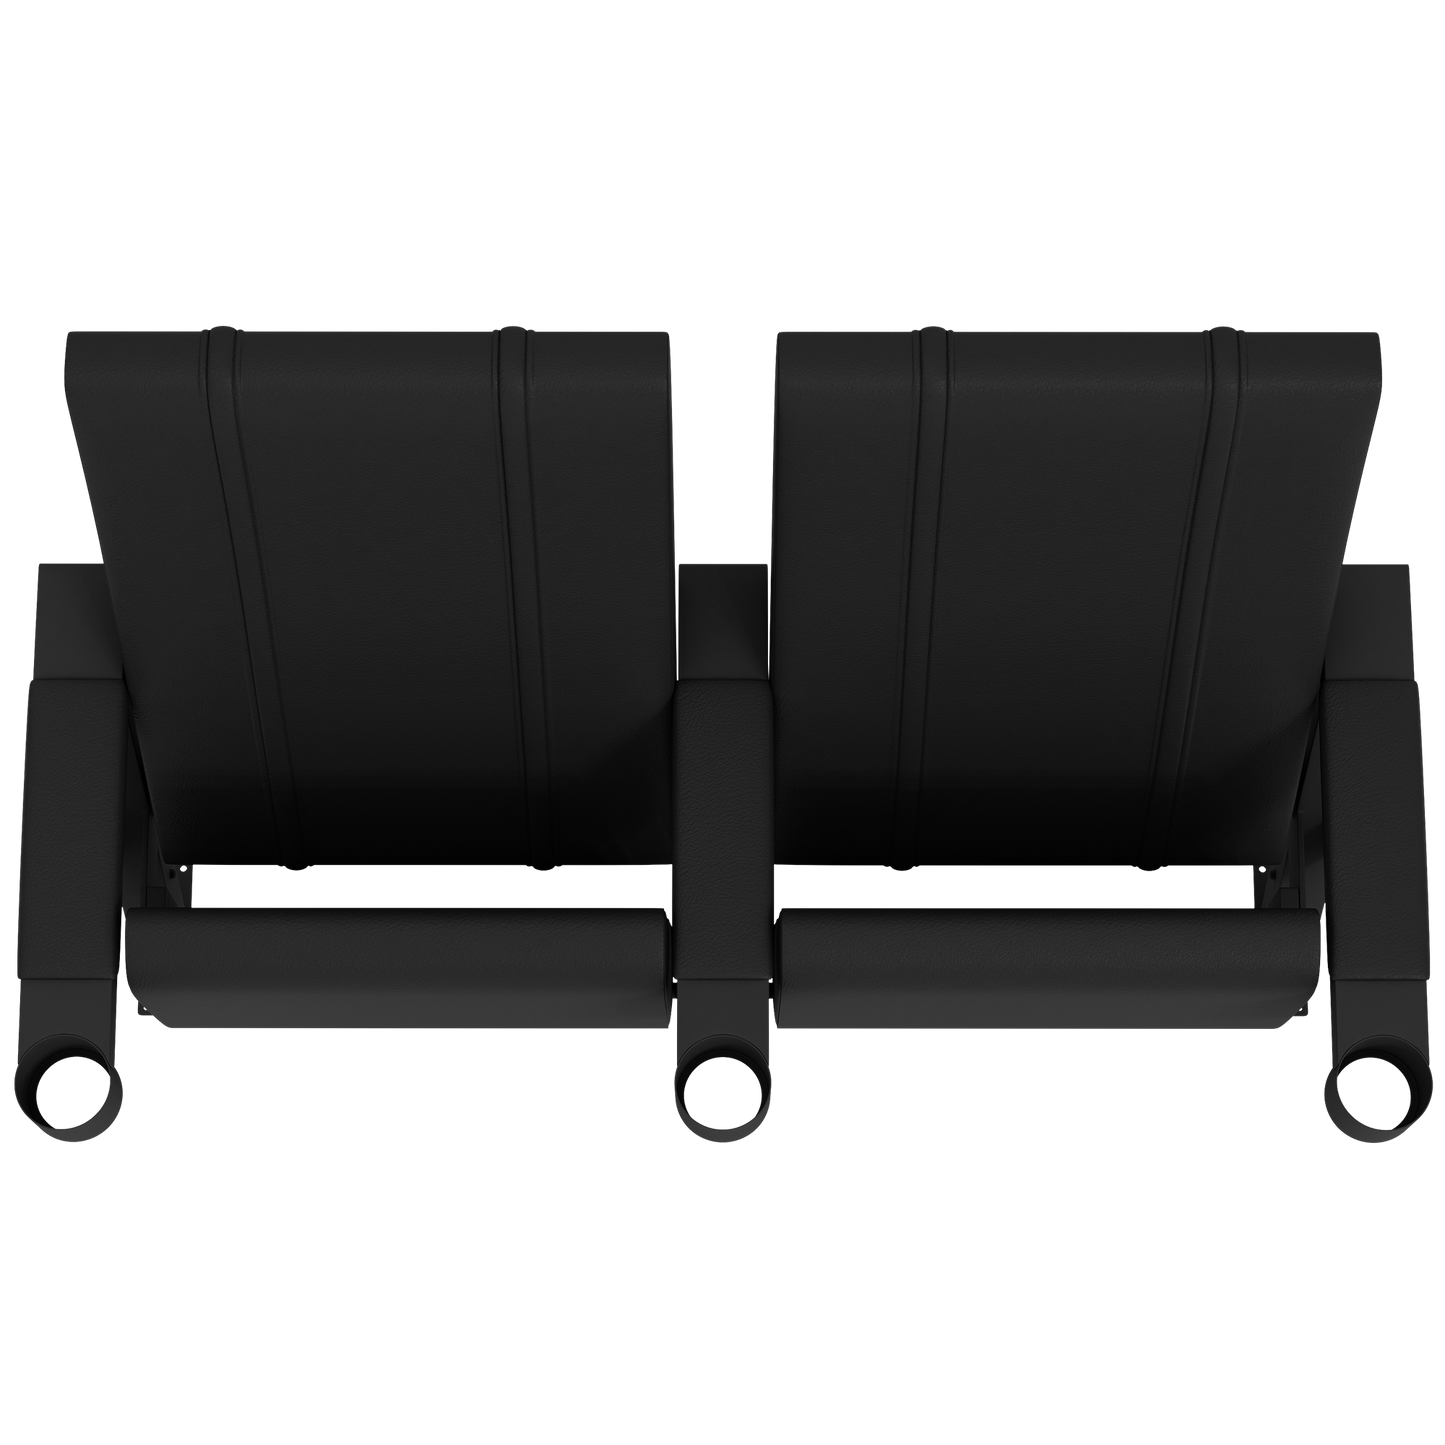 SuiteMax 3.5 VIP Seats with Cleveland Cavaliers Primary Logo